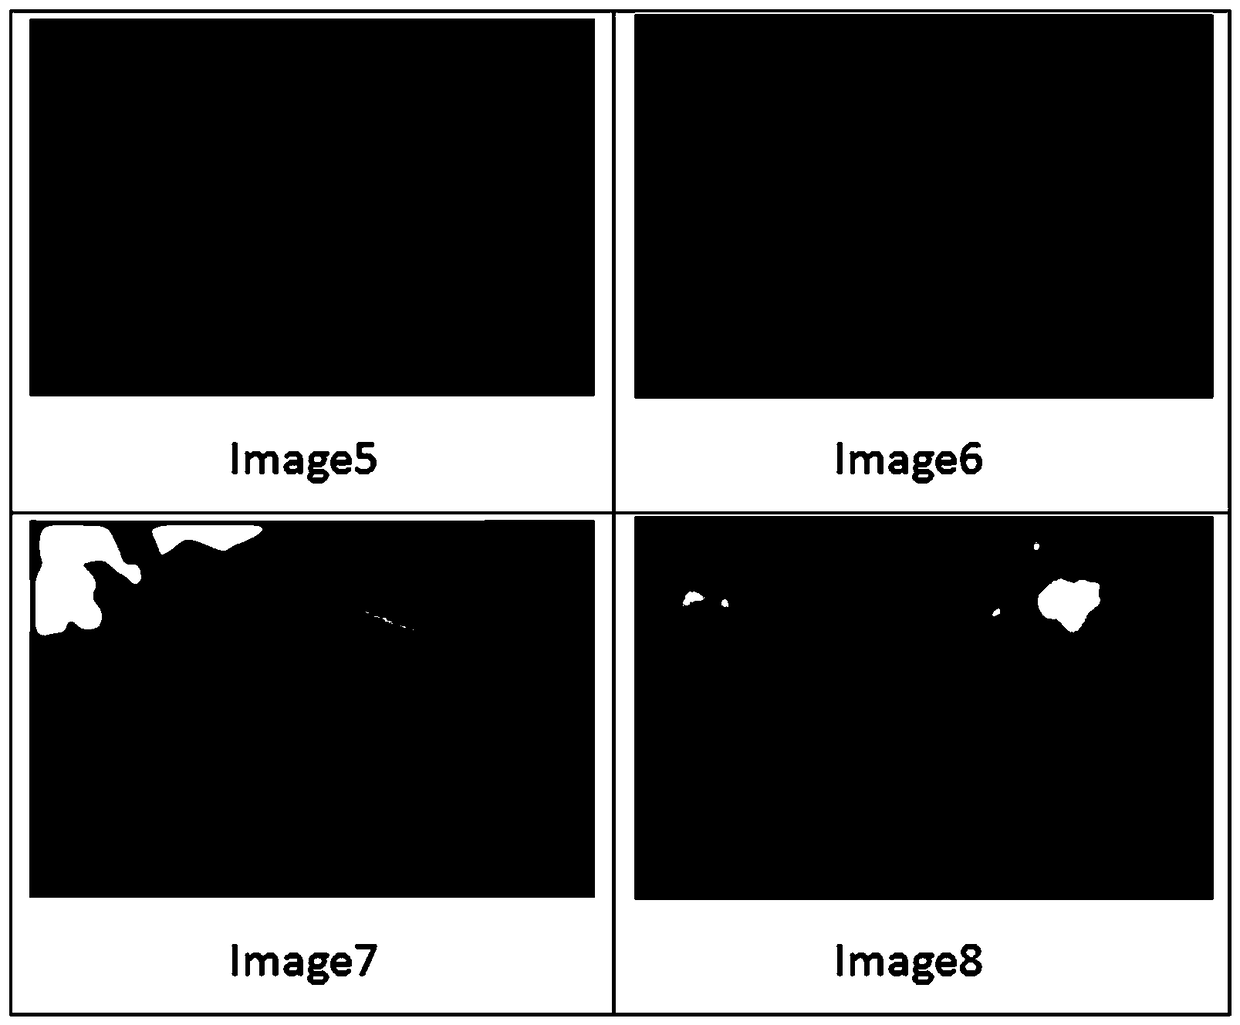 Fuzzy detection method for SVD (Singular Value Decomposition) on the basis of image DCT (Discrete Cosine Transform) domain